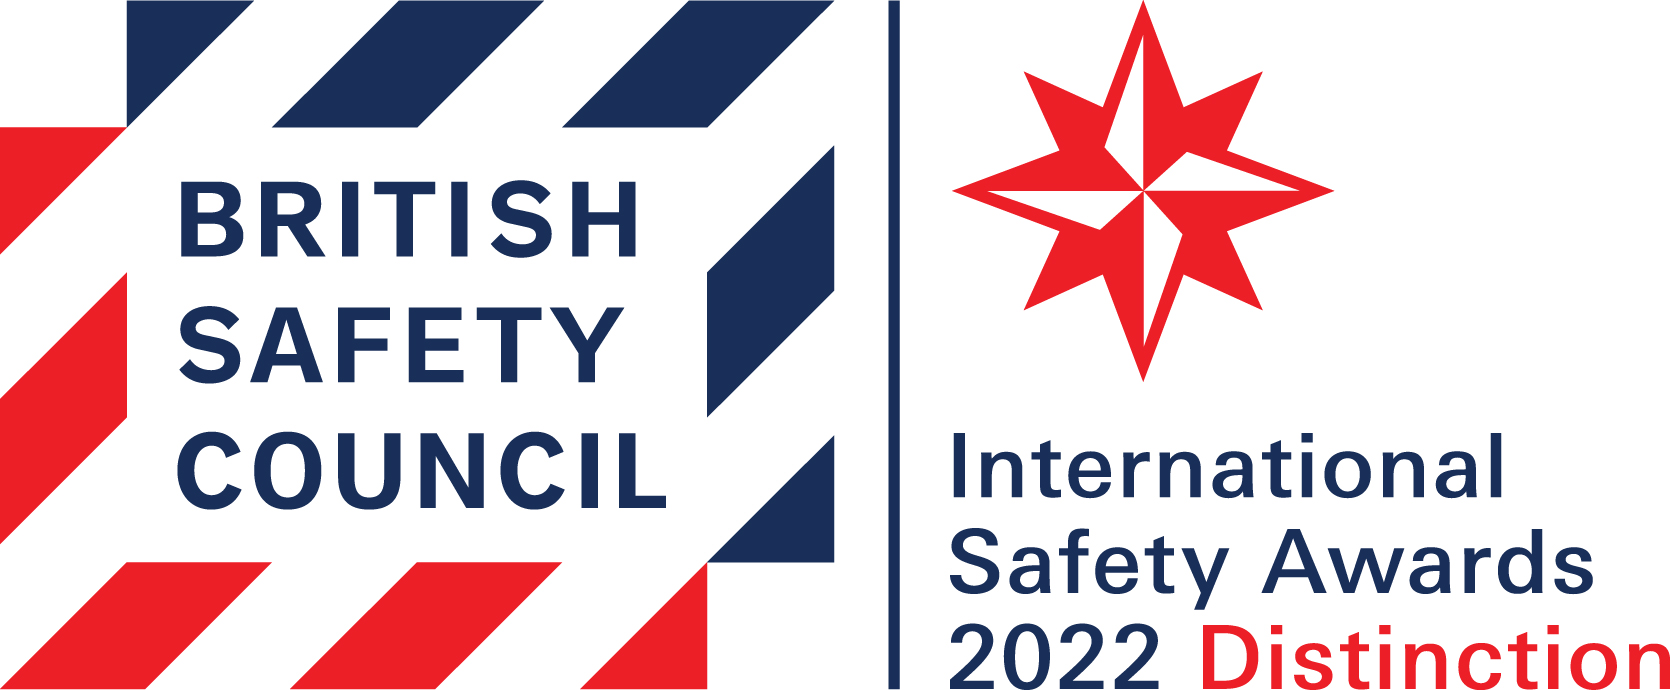 Khalifa University Wins British Safety Council’s International Safety Awards 2022 with ‘Distinction’ for Health and Safety Measures